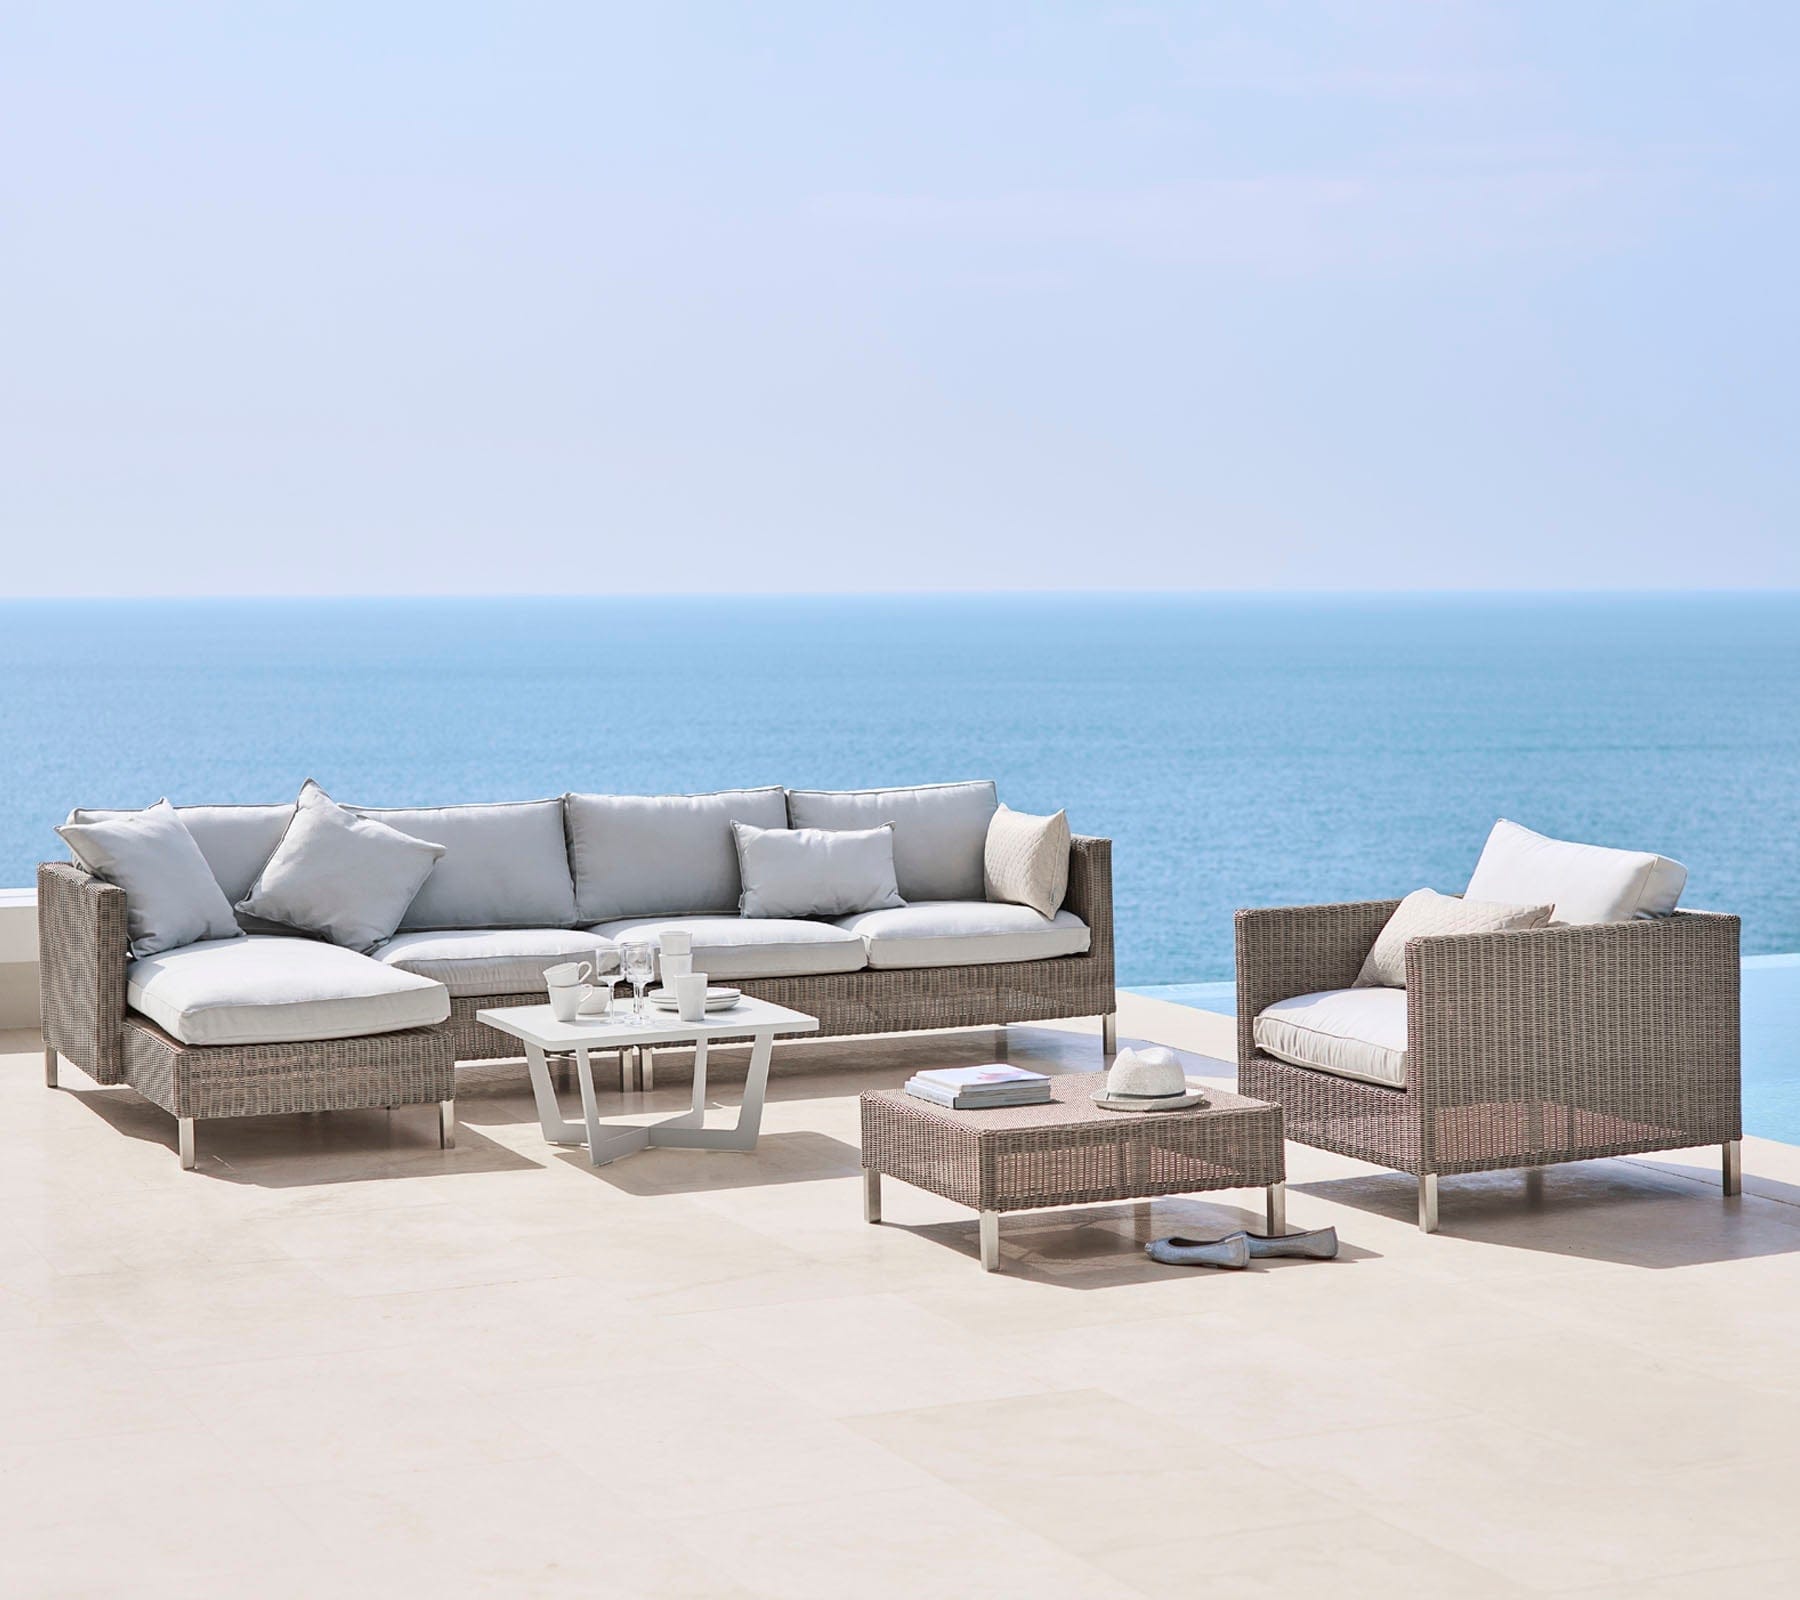 Boxhill's Connect Right Sectional Lounge Chair lifestyle image with other module sofa, Connect Lounge Chair and Connect Footstool beside the pool